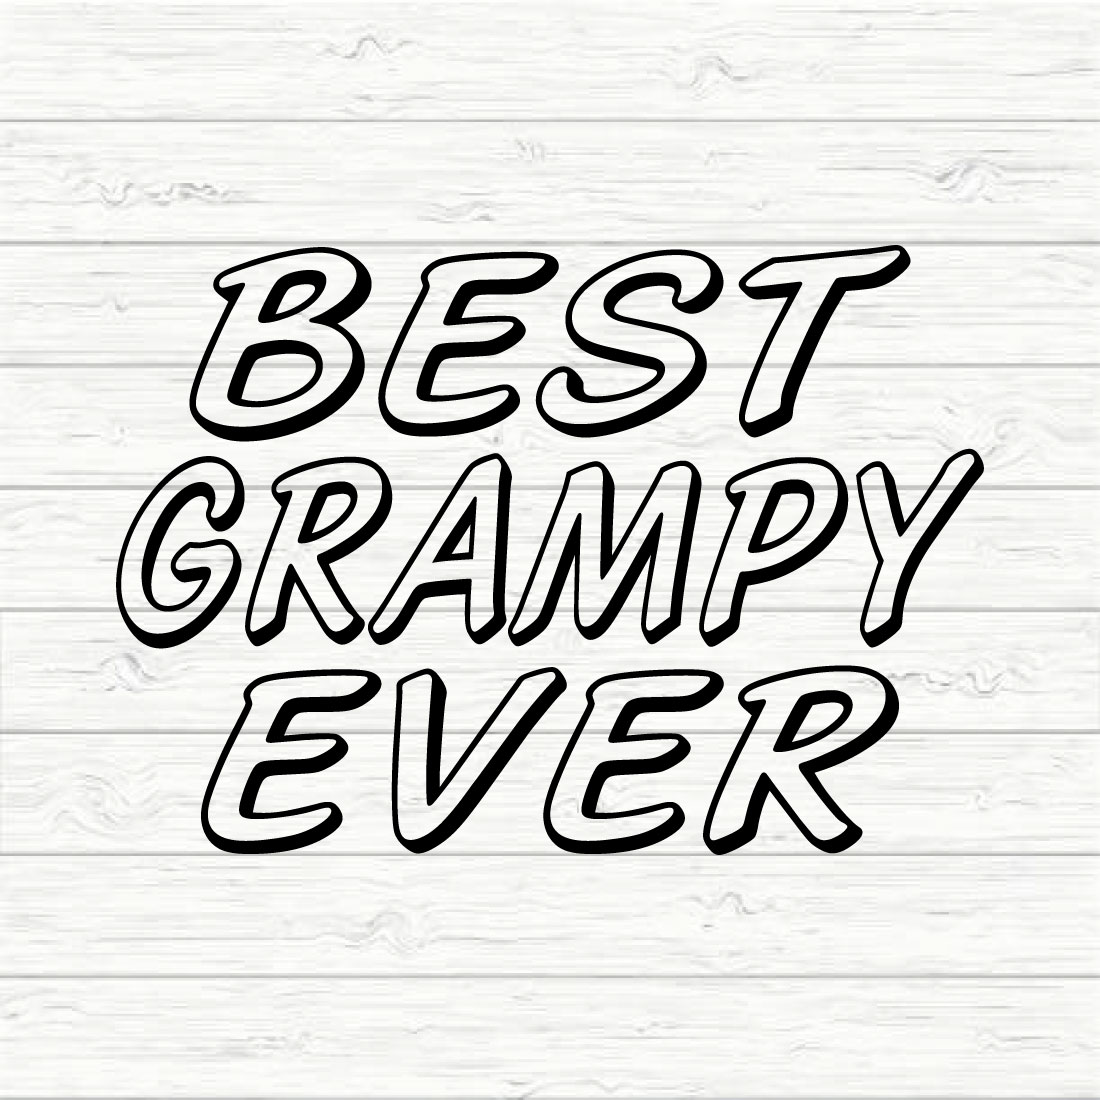 Best grampy ever preview image.